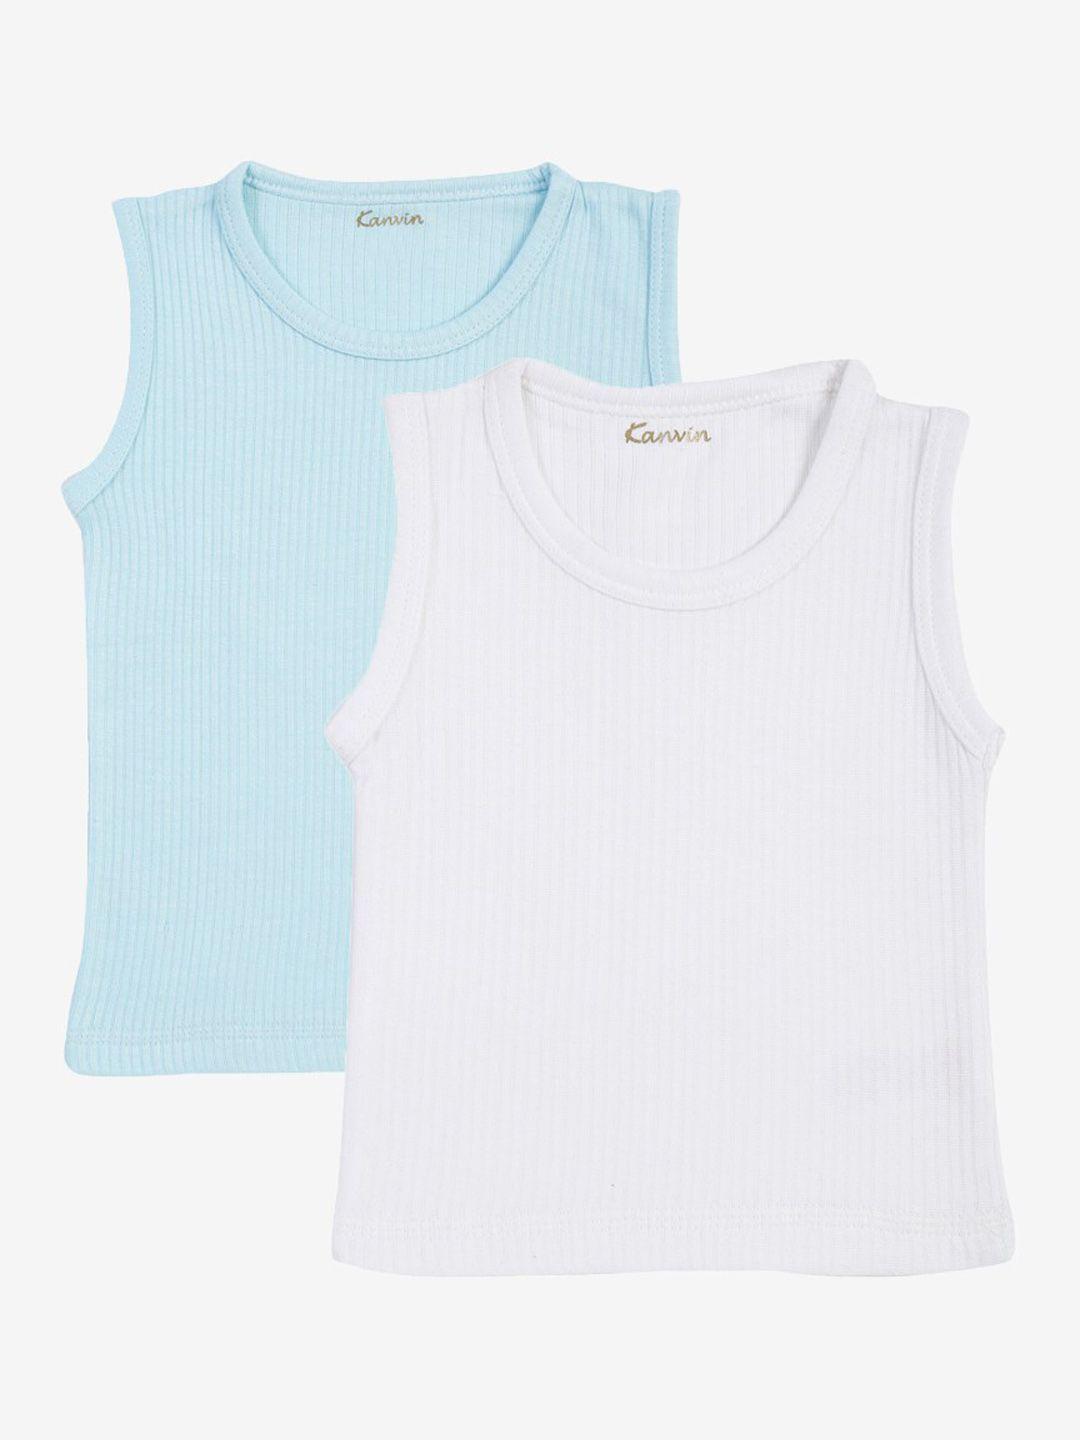 kanvin boys turquoise blue & white pack of 2 solid cotton thermal tops